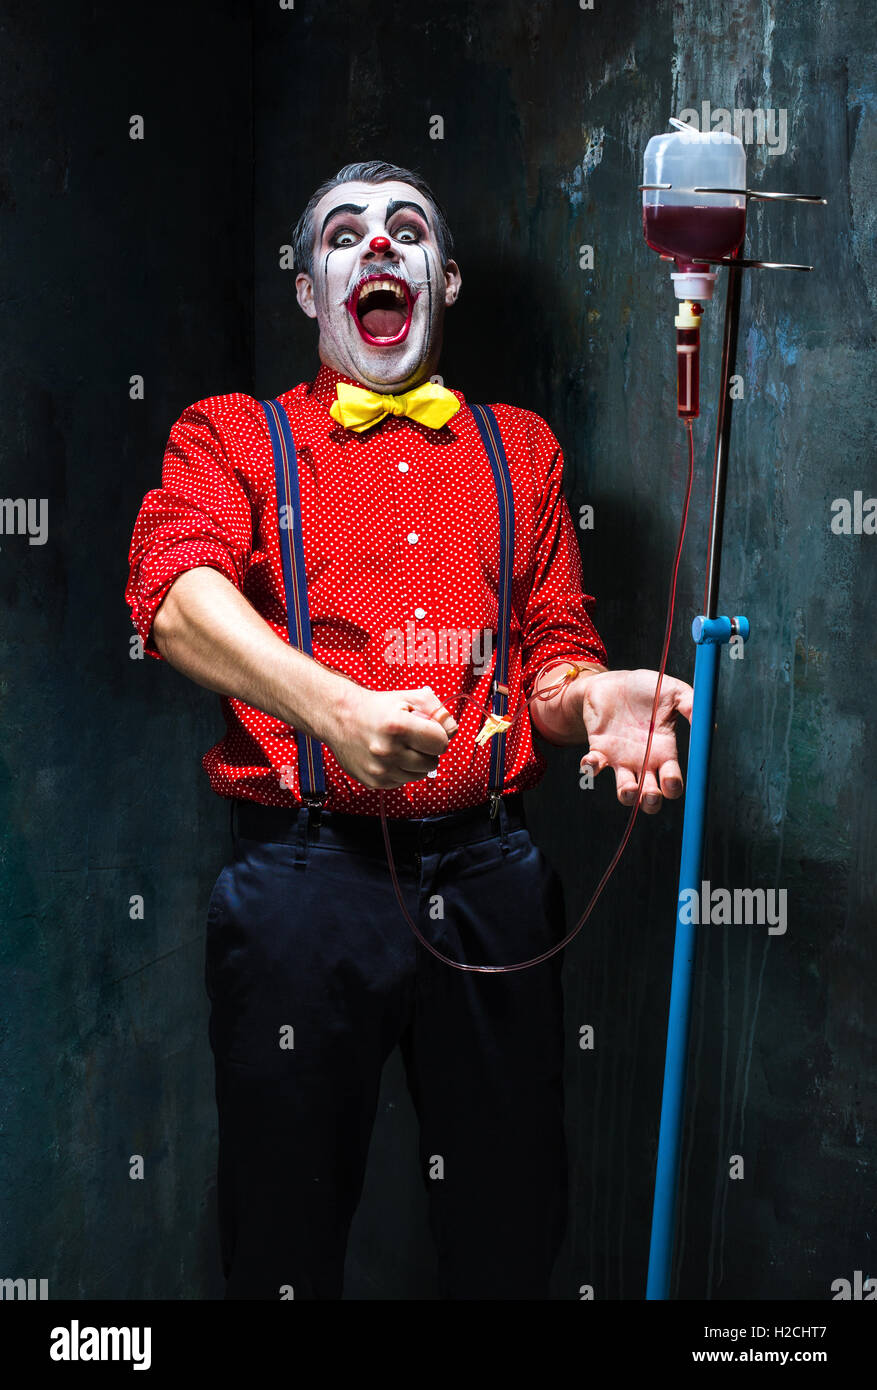 The scary clown and drip with blood on dack background. Halloween concept Stock Photo